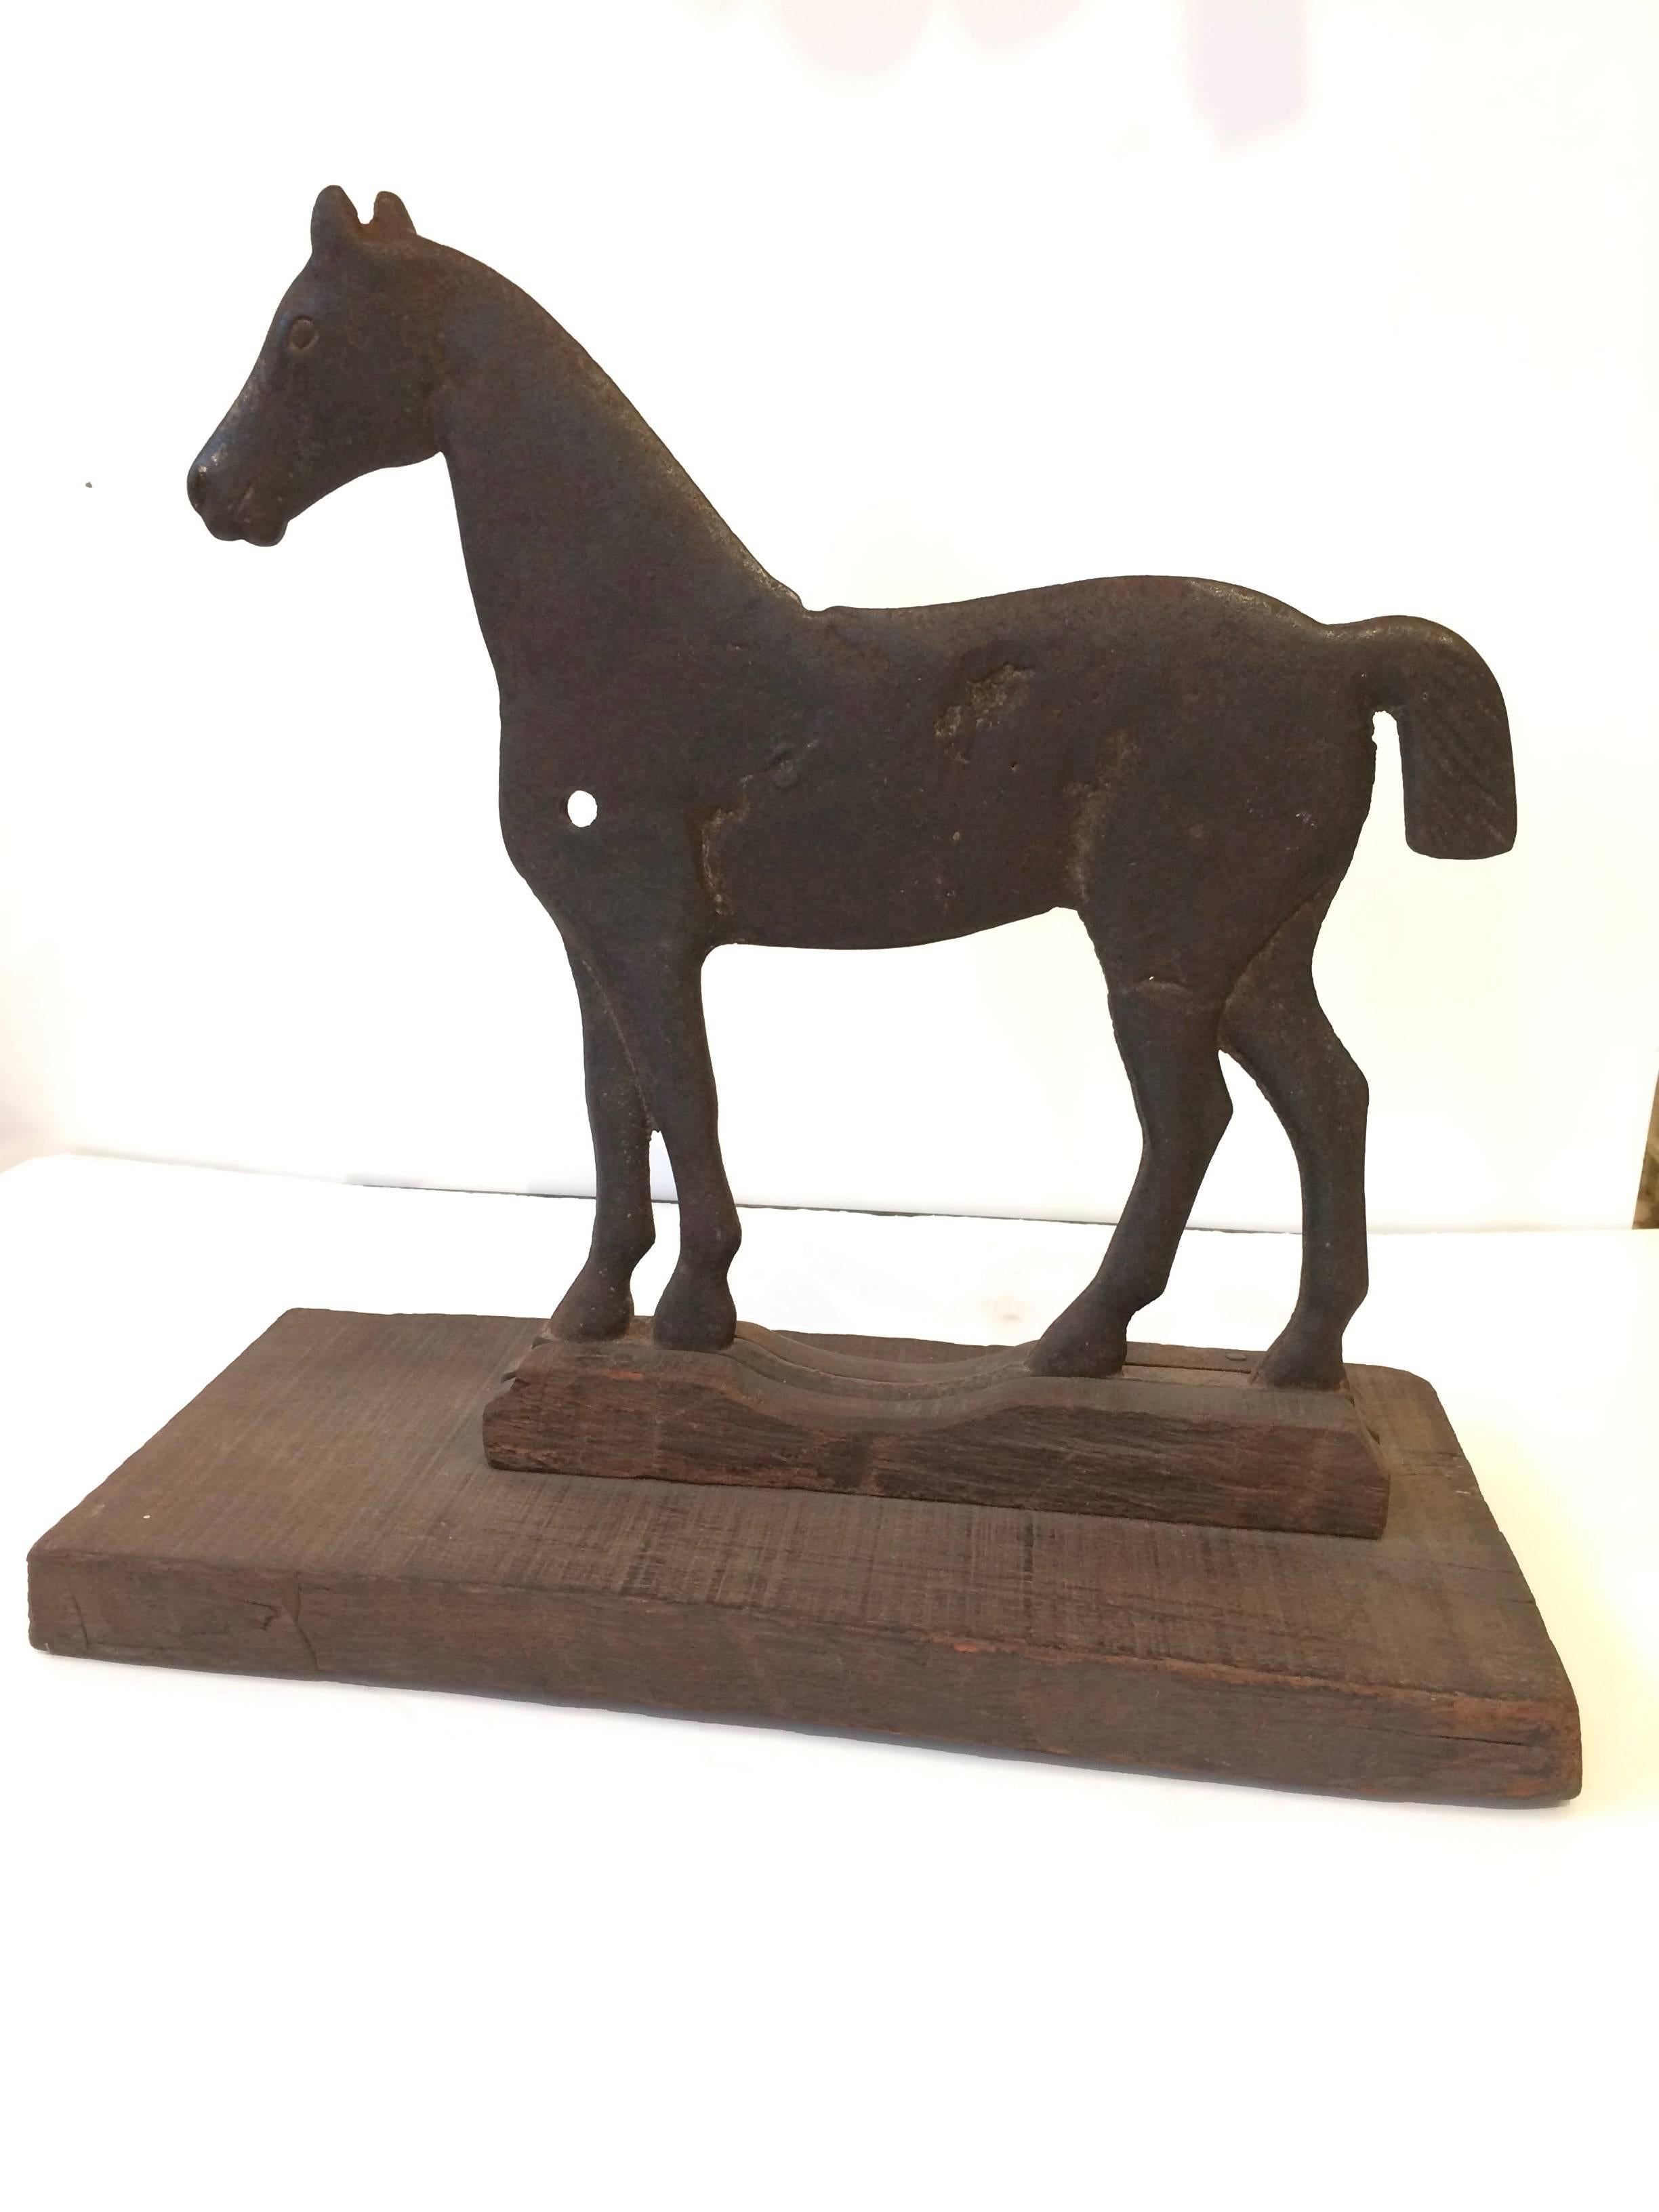 Wonderful found object bobtail horse made of weathered cast iron, once a windmill weight from Maine, mounted on barn wood base to be a fabulous tabletop accessory. Dempster Nebraska Manufacturing, circa 1880.